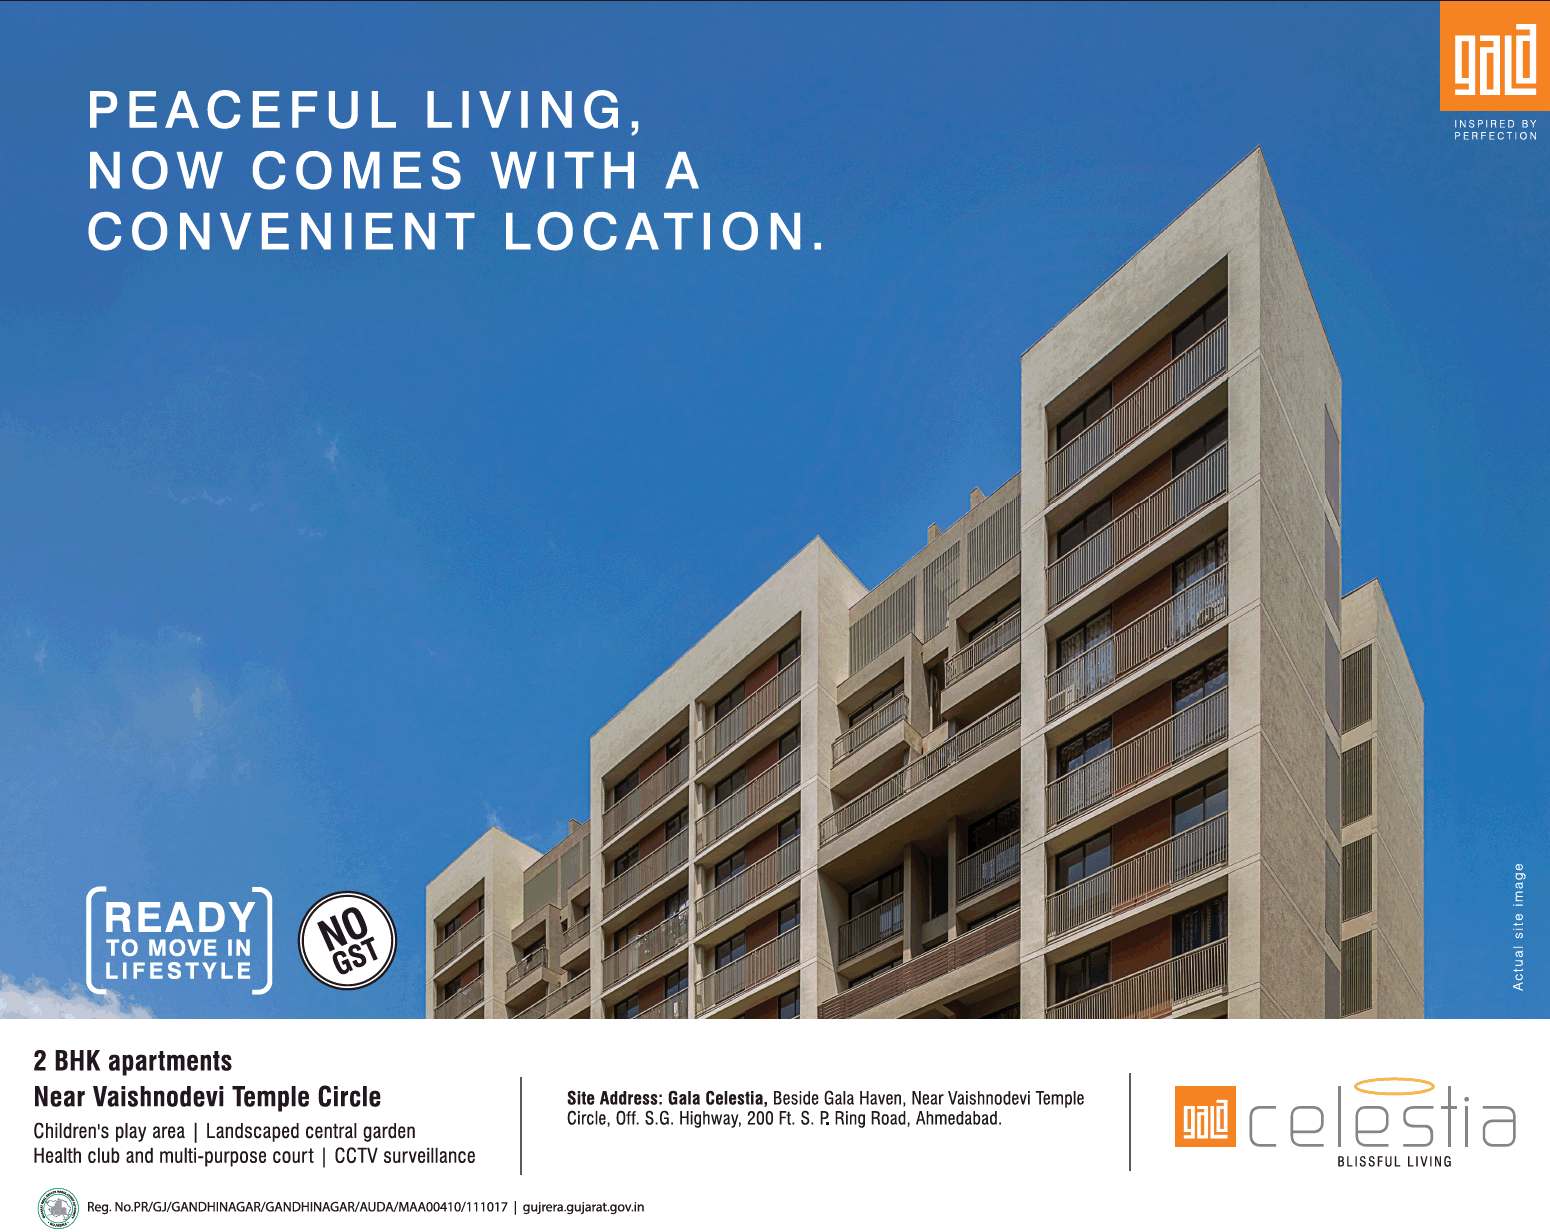 Book ready to move 2 BHK homes at Gala Celestia in Vaishnodevi Circle, Ahmedabad Update